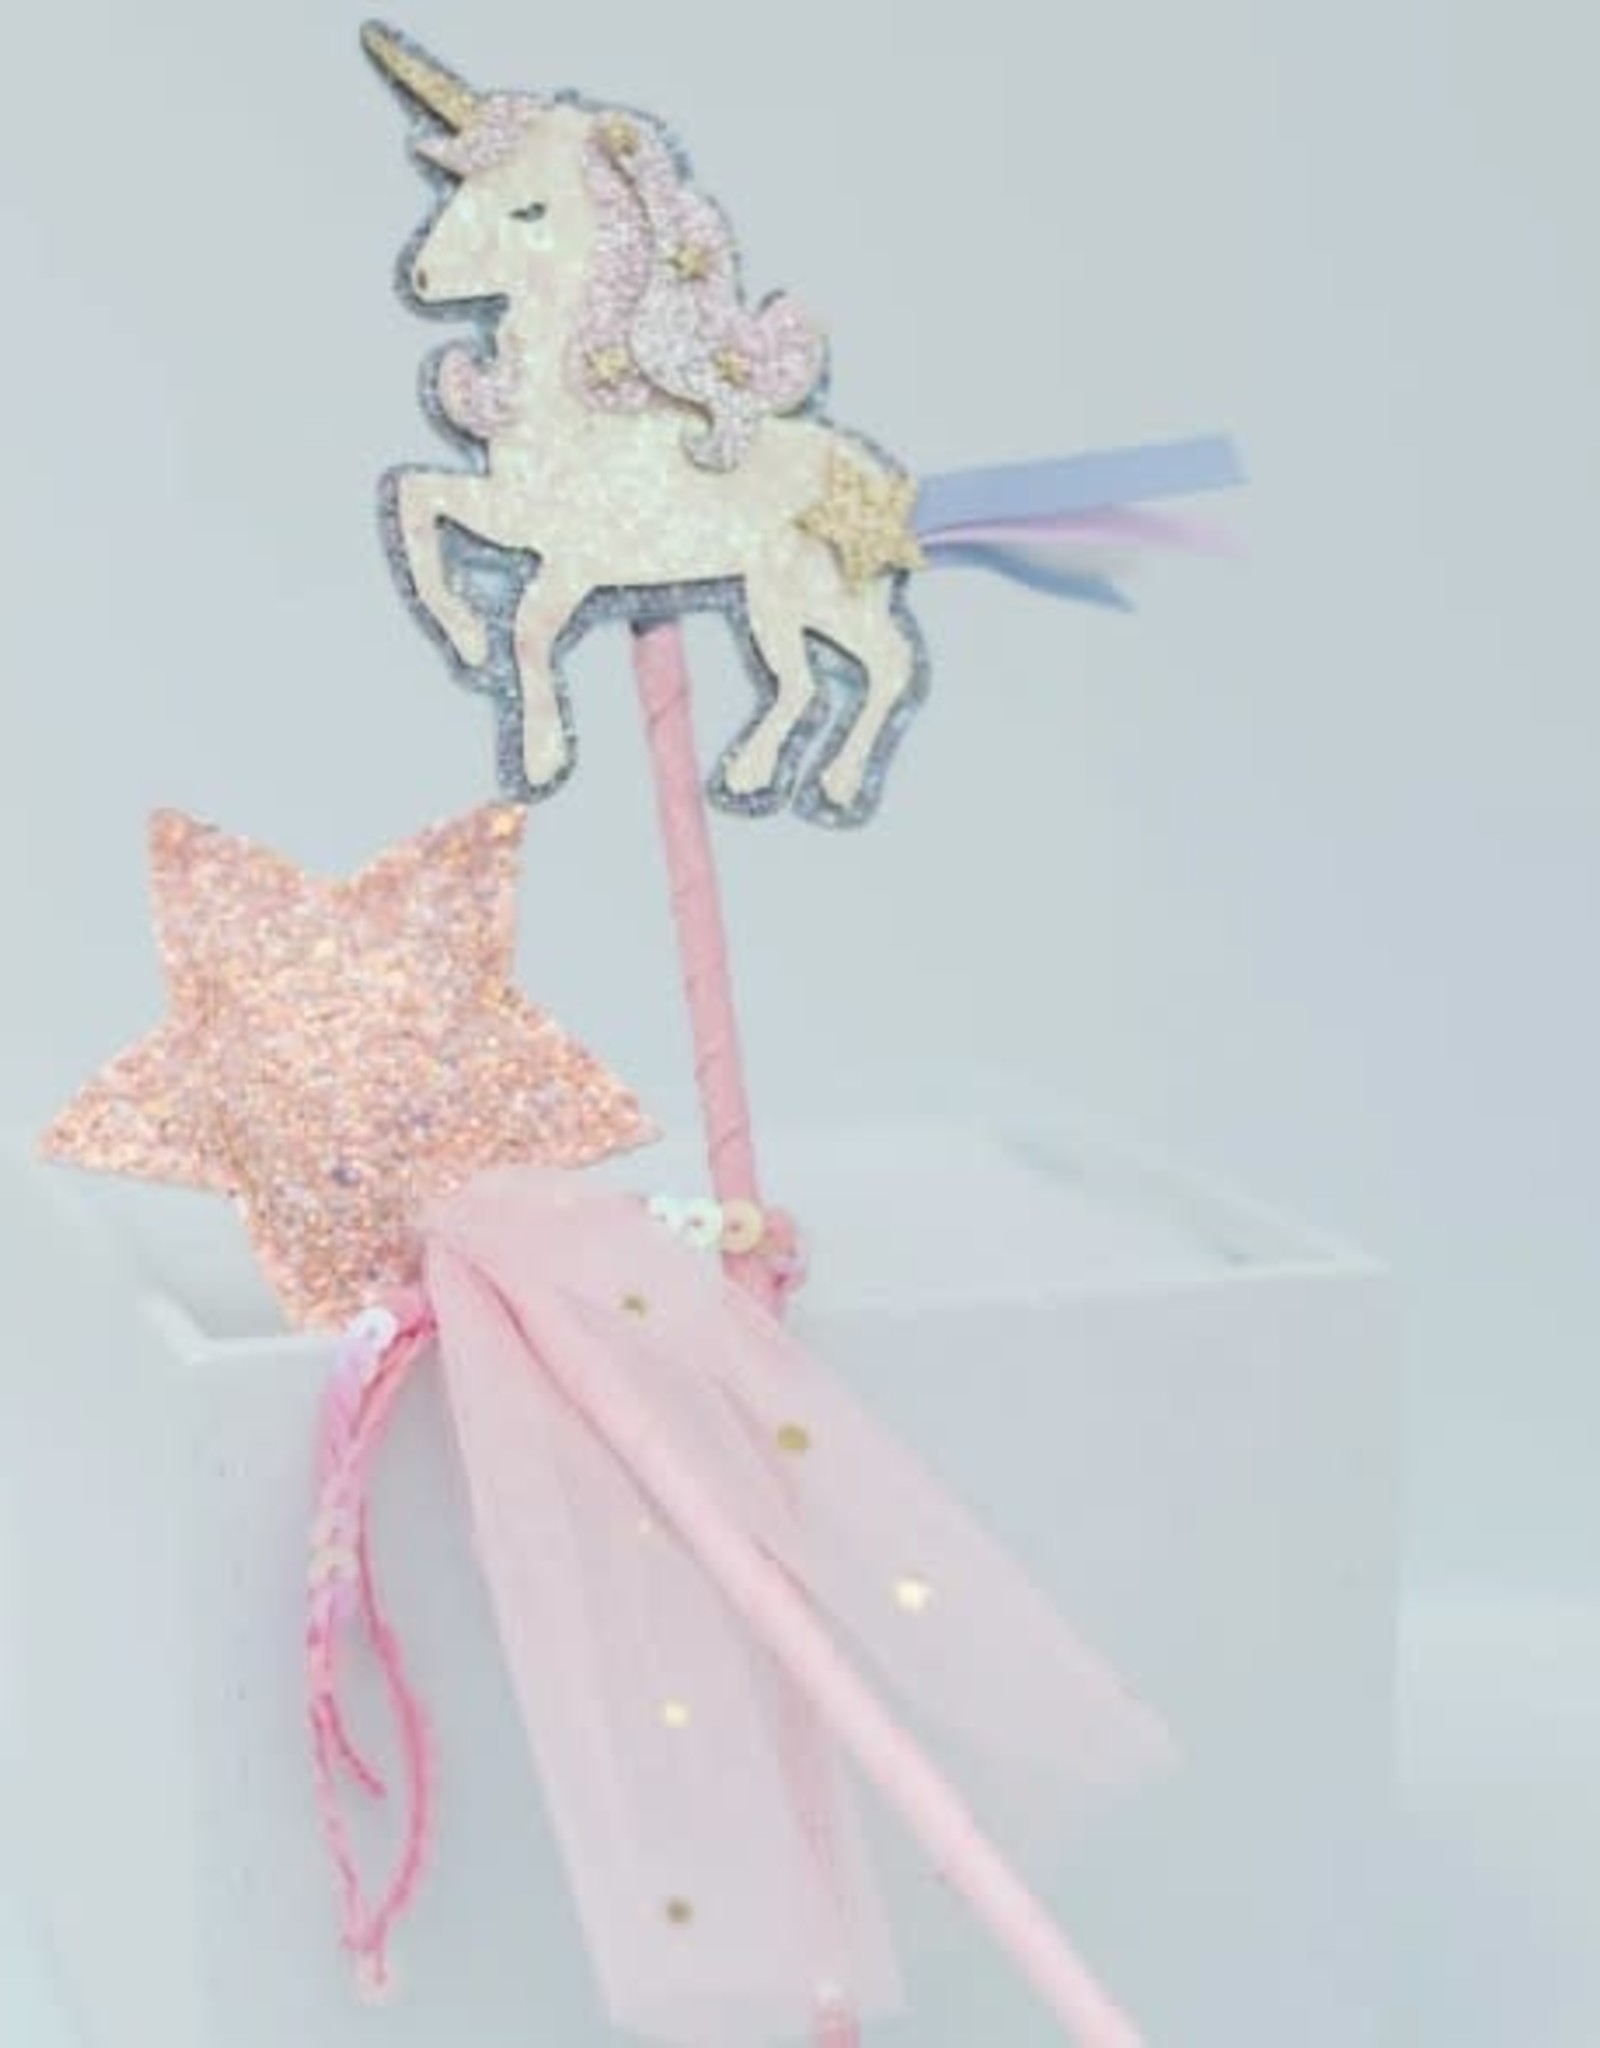 Great Pretenders Boutique Unicorn & Star Wands, Assorted